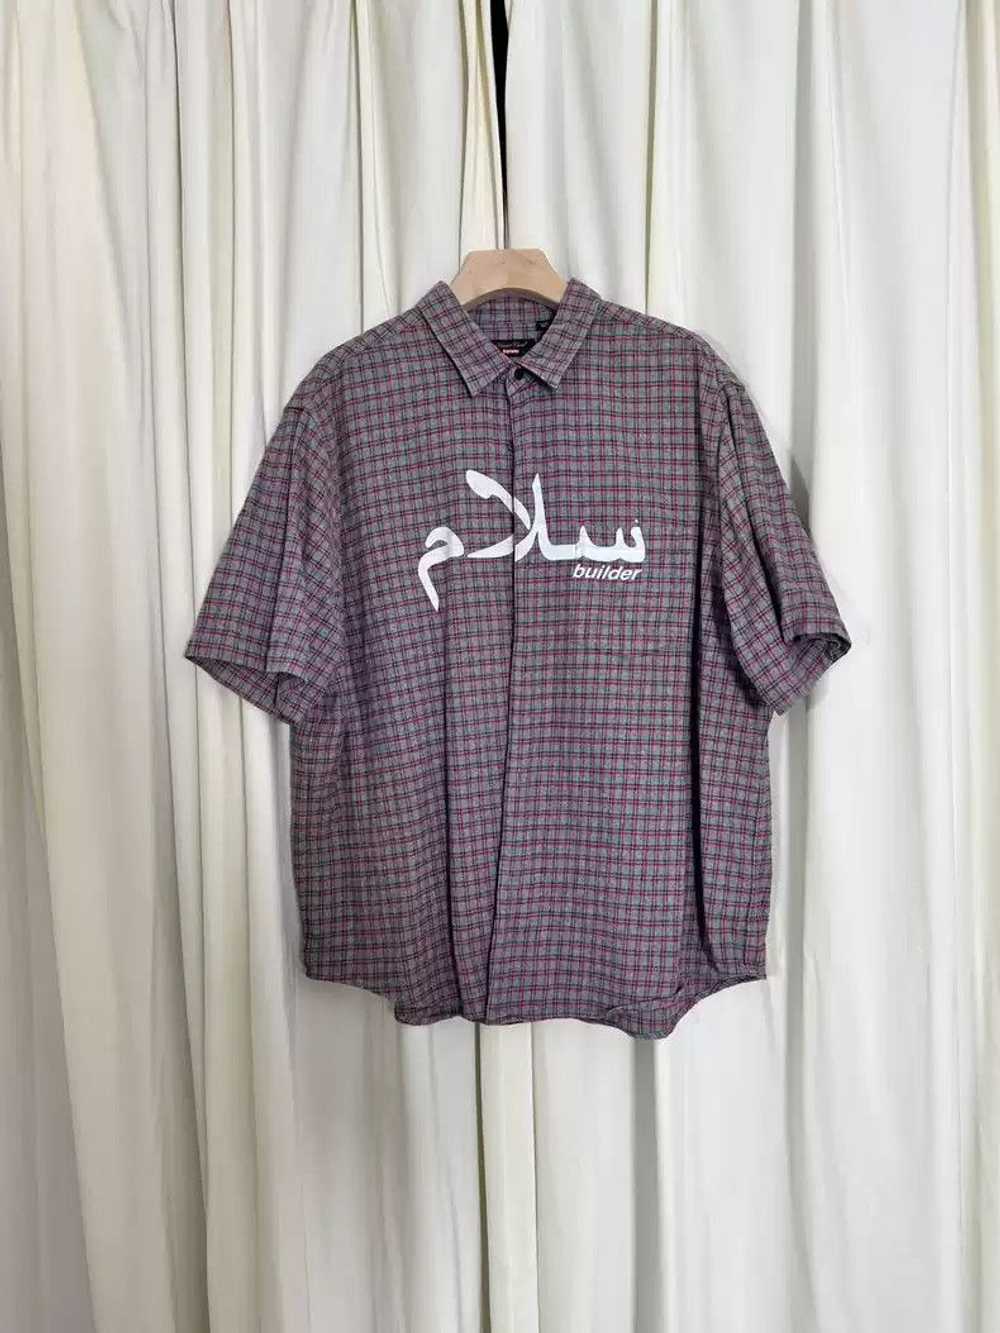 Undercover supreme undercover short sleeve shirt - image 1